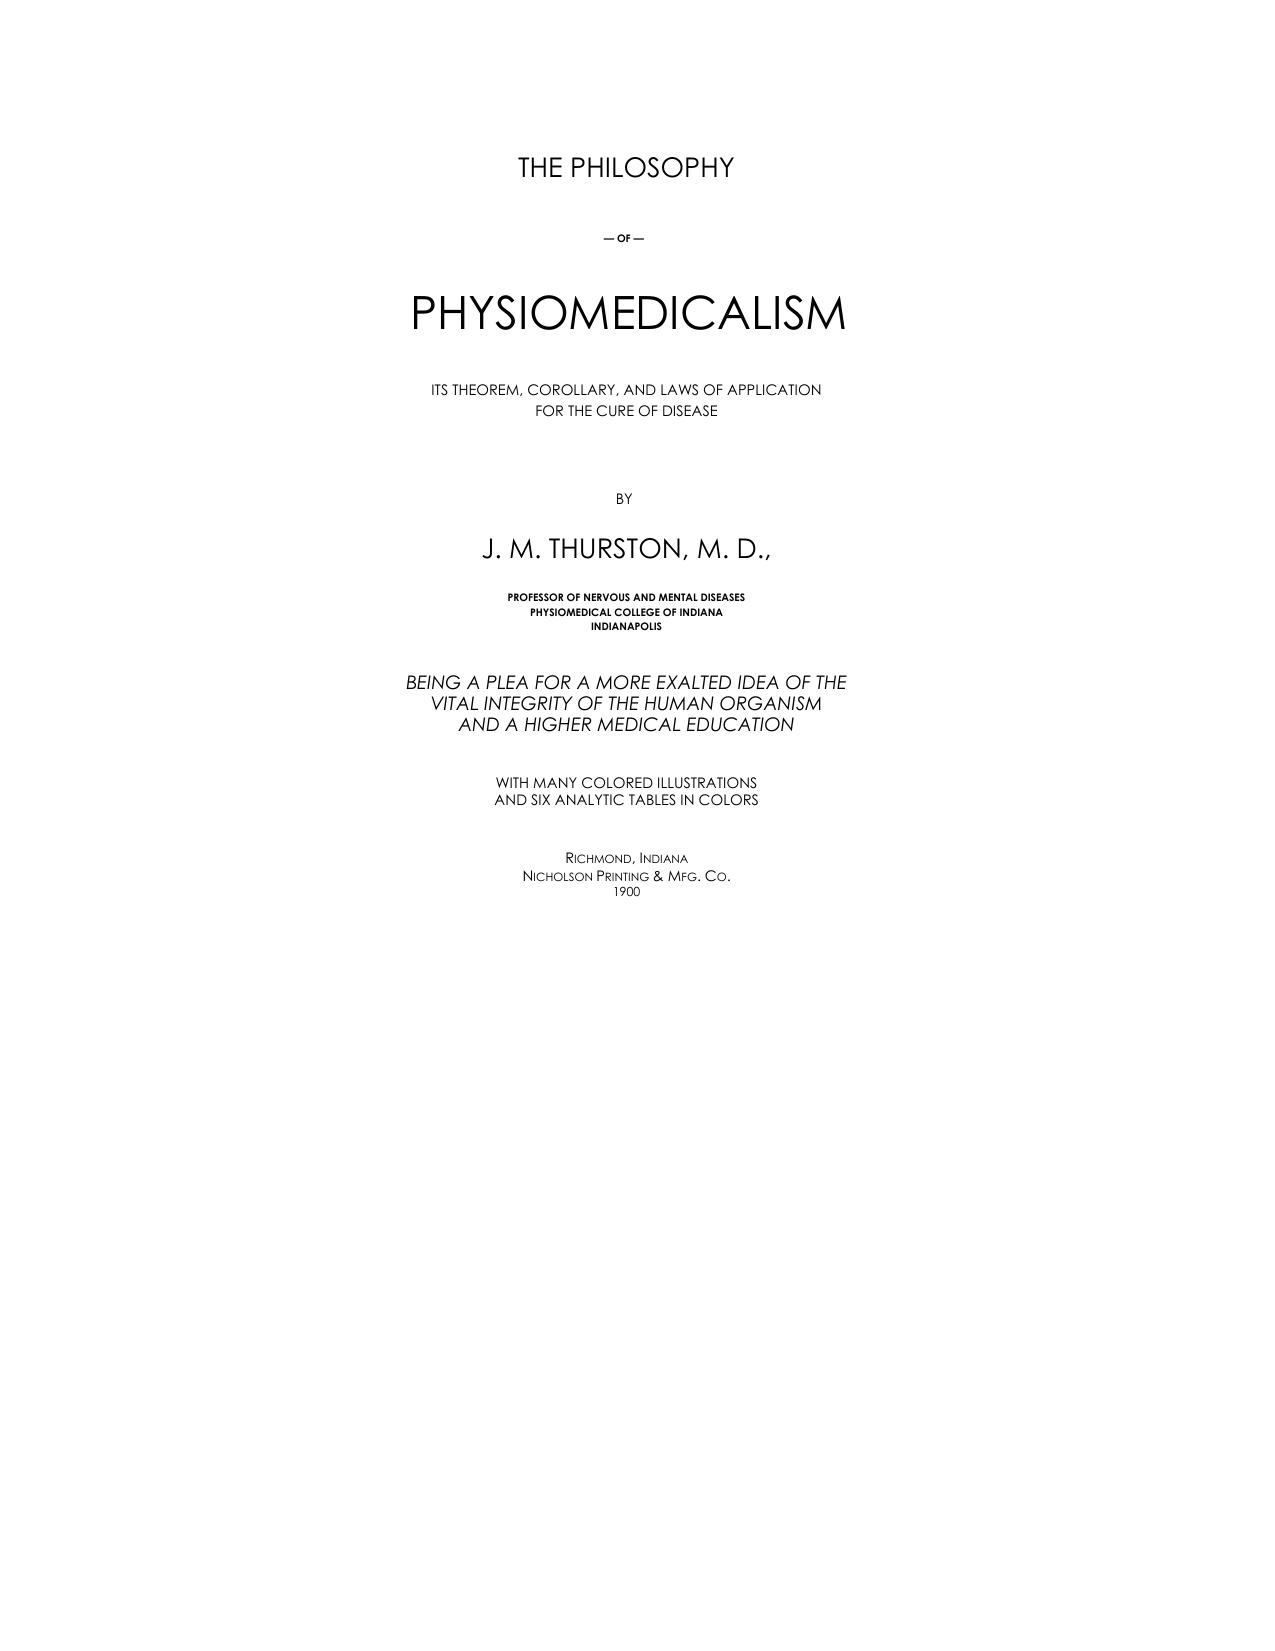 The Philosophy of Physiomedicalism - Its Theorem, Corrolary, and Laws of Application for the Cure of Disease